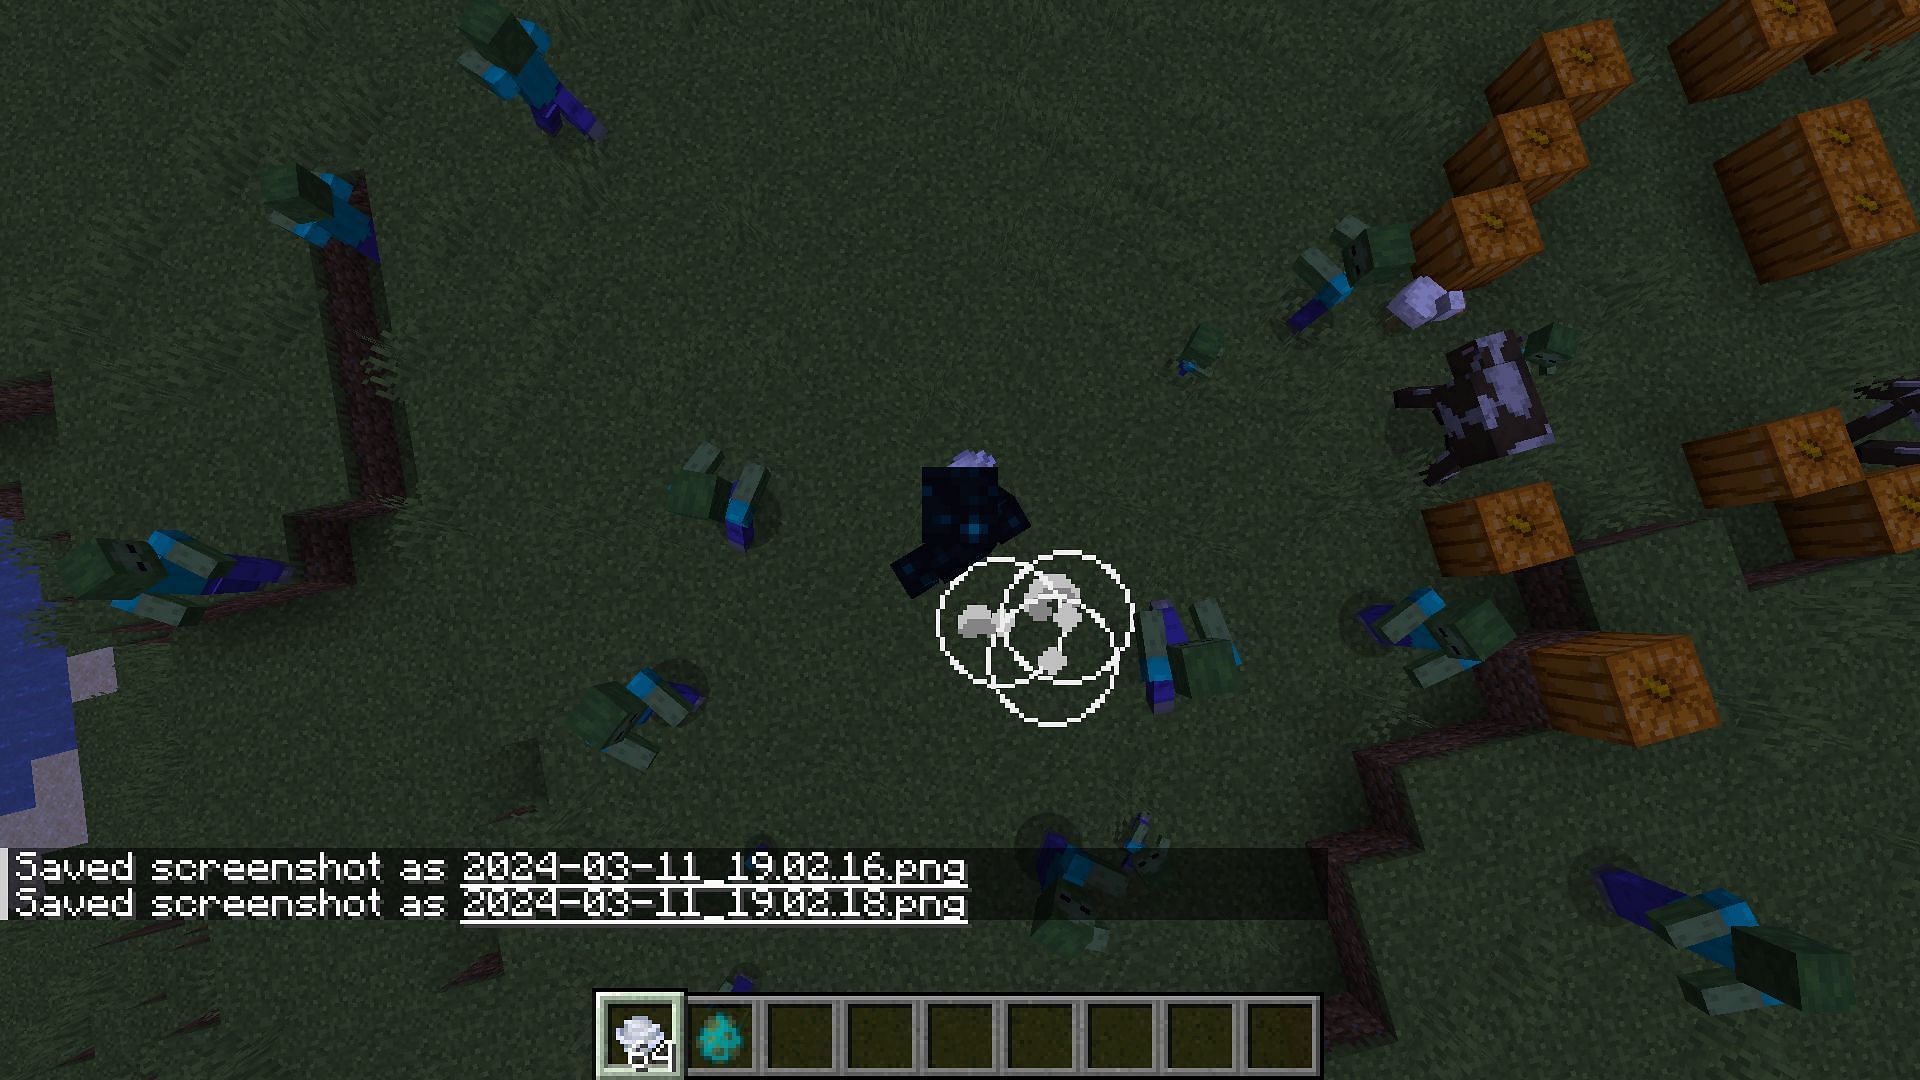 Players can launch themselves multiple times by continuously using smash attacks in the Minecraft 1.21 update (Image via Mojang Studios)